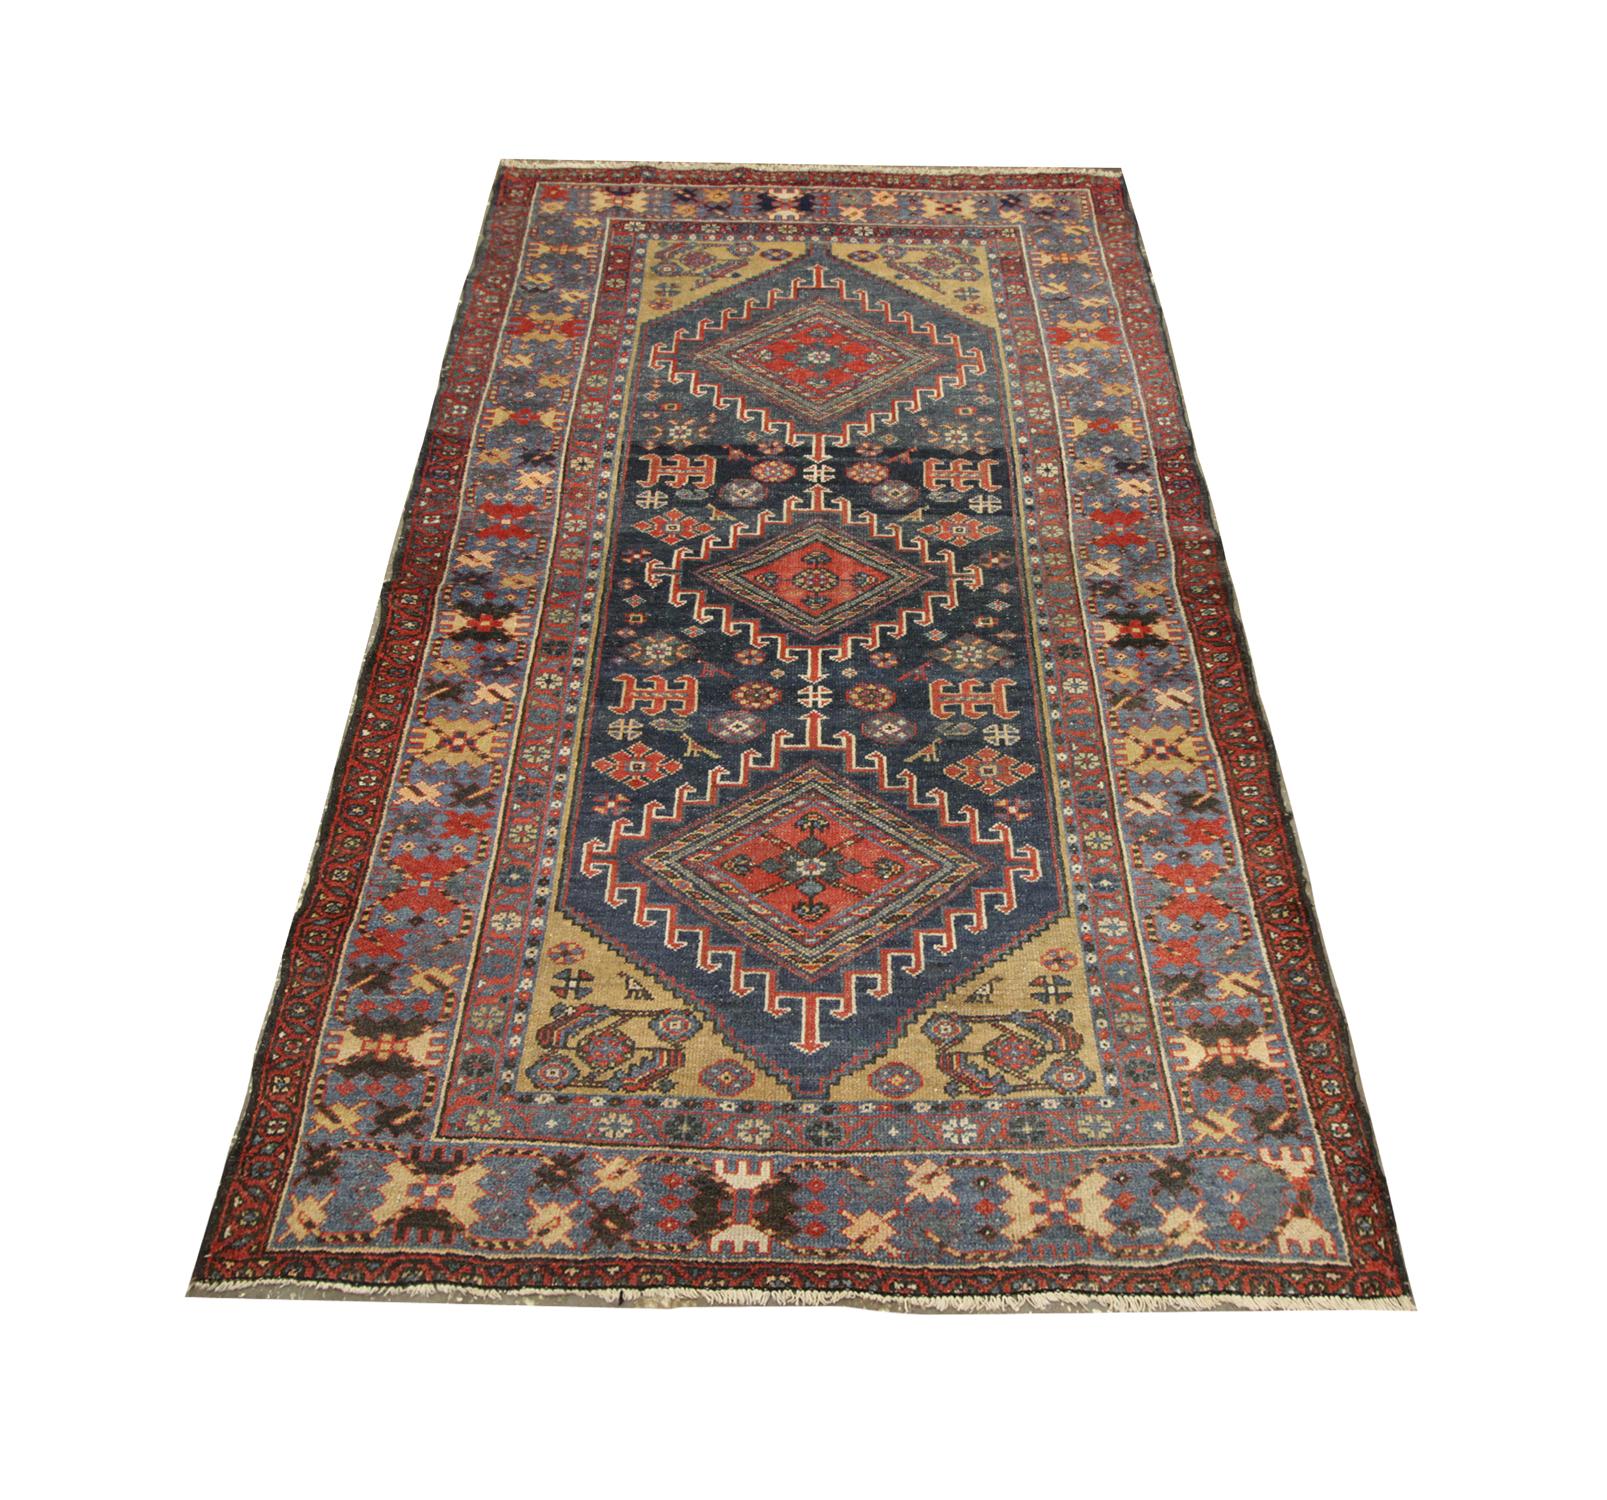 This high-quality antique Caucasian rug was handwoven in 1920 with hand-spun, vegetable-dyed wool, and cotton, by some of the finest Rug artisans. Perfect for both modern or traditional interiors, bedrooms, living rooms or even entryways, this